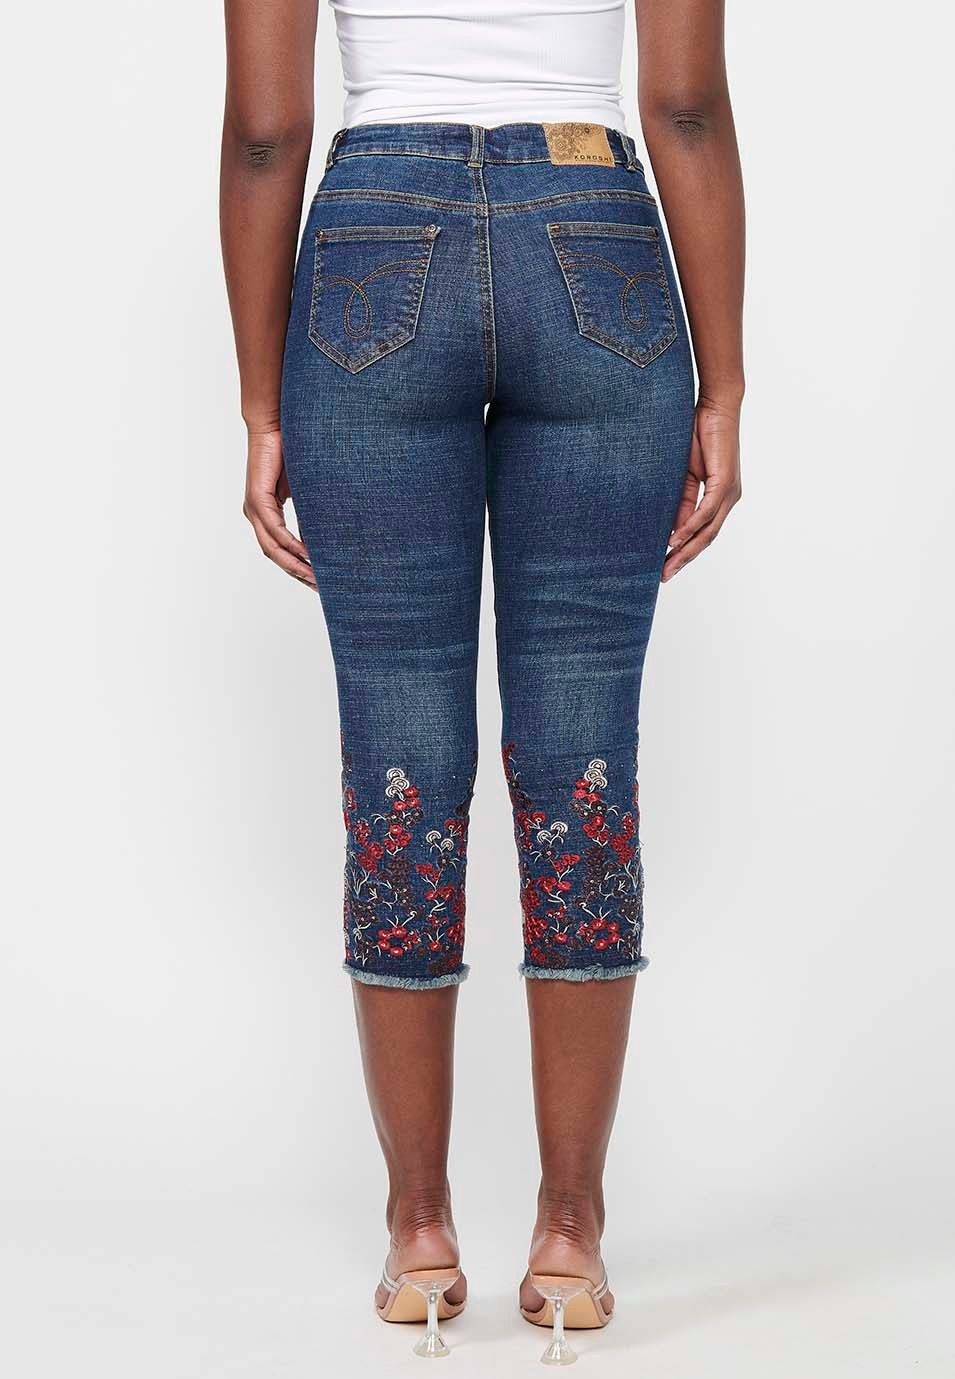 Pirate pants finished in floral embroidery, dark blue color for women